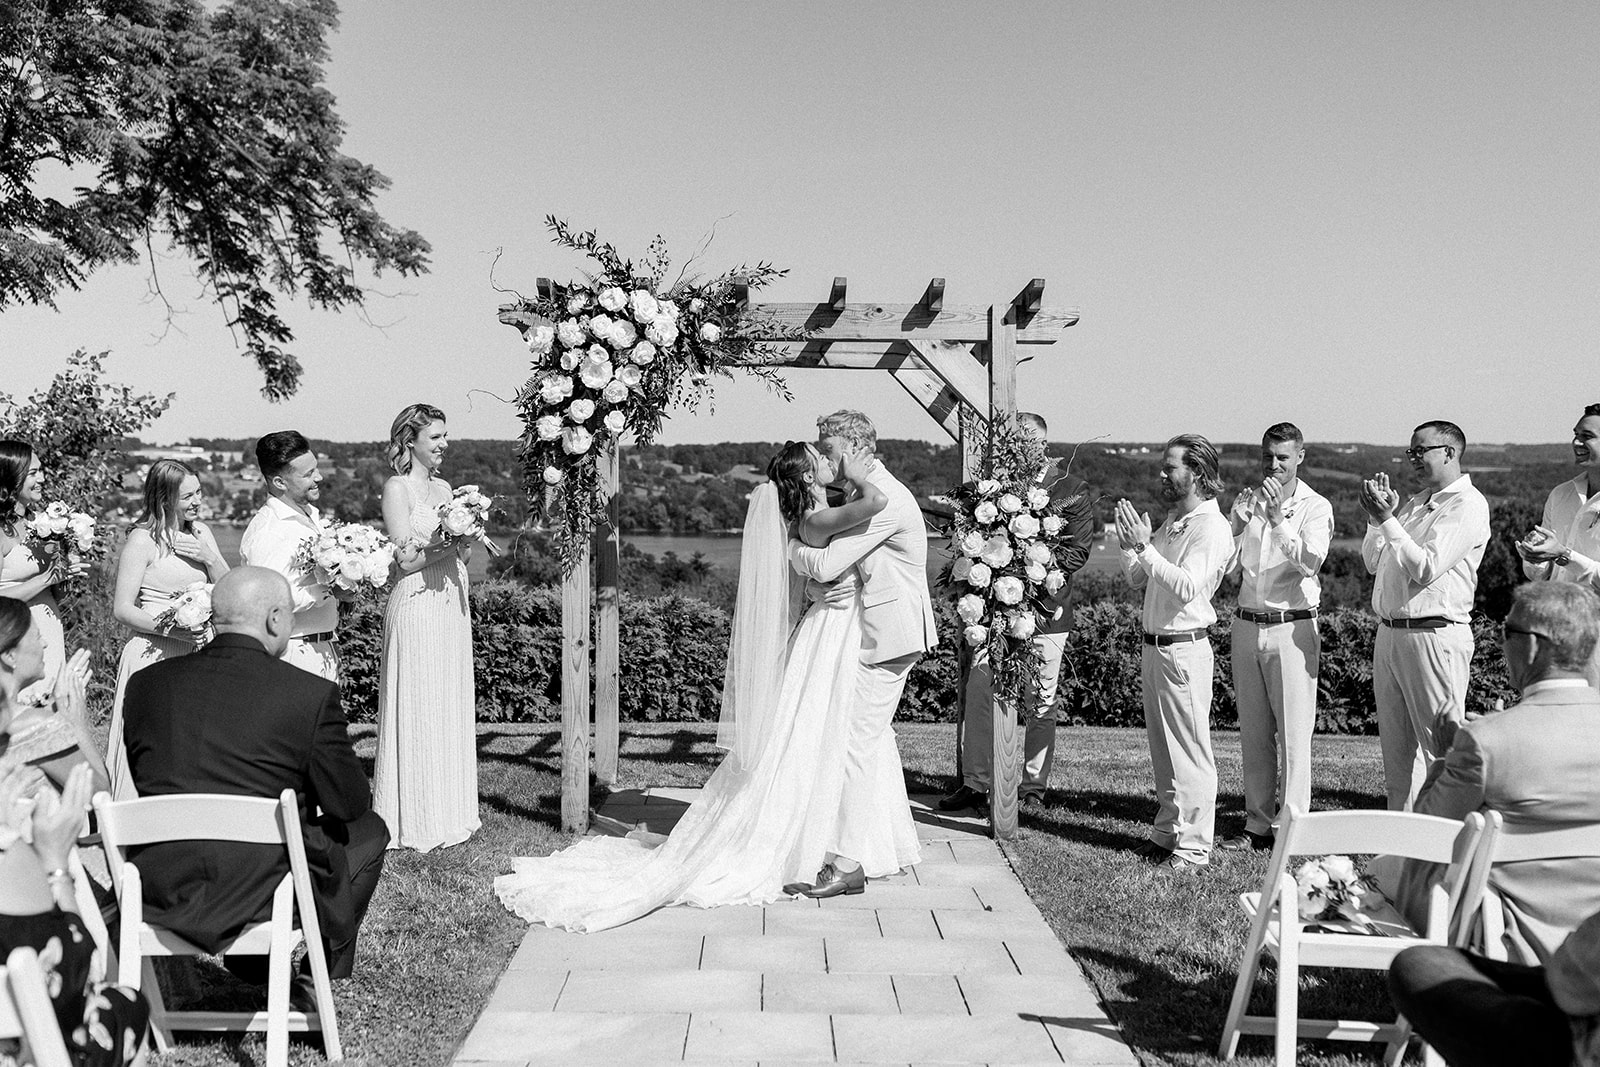 The bride and groom's first kiss at Crispin Hill.